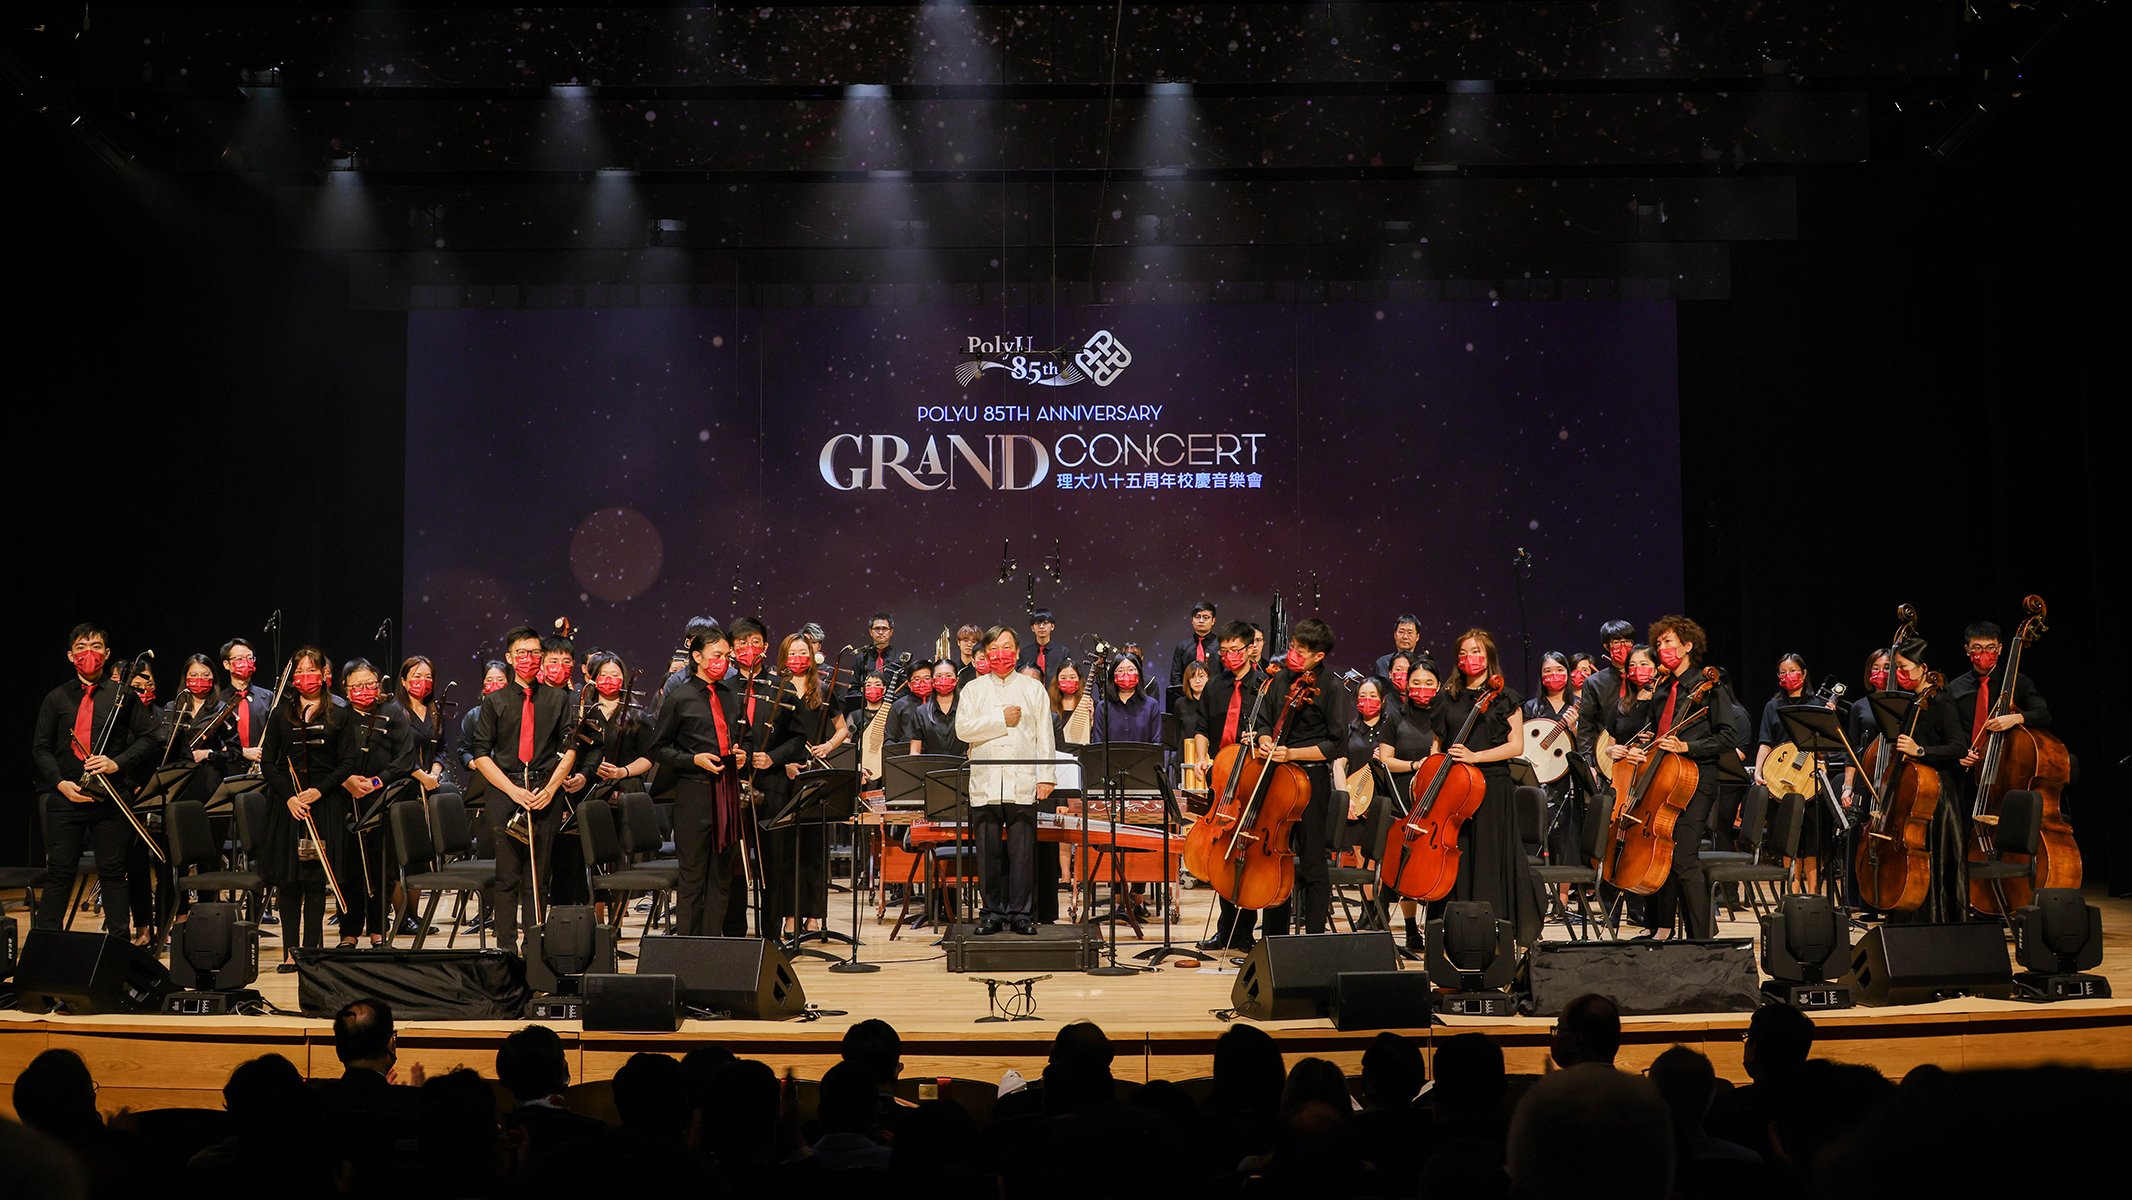 The Federation of PolyU Alumni Associations Chinese Orchestra played a medley of hit songs from the 1930s and 1940s.